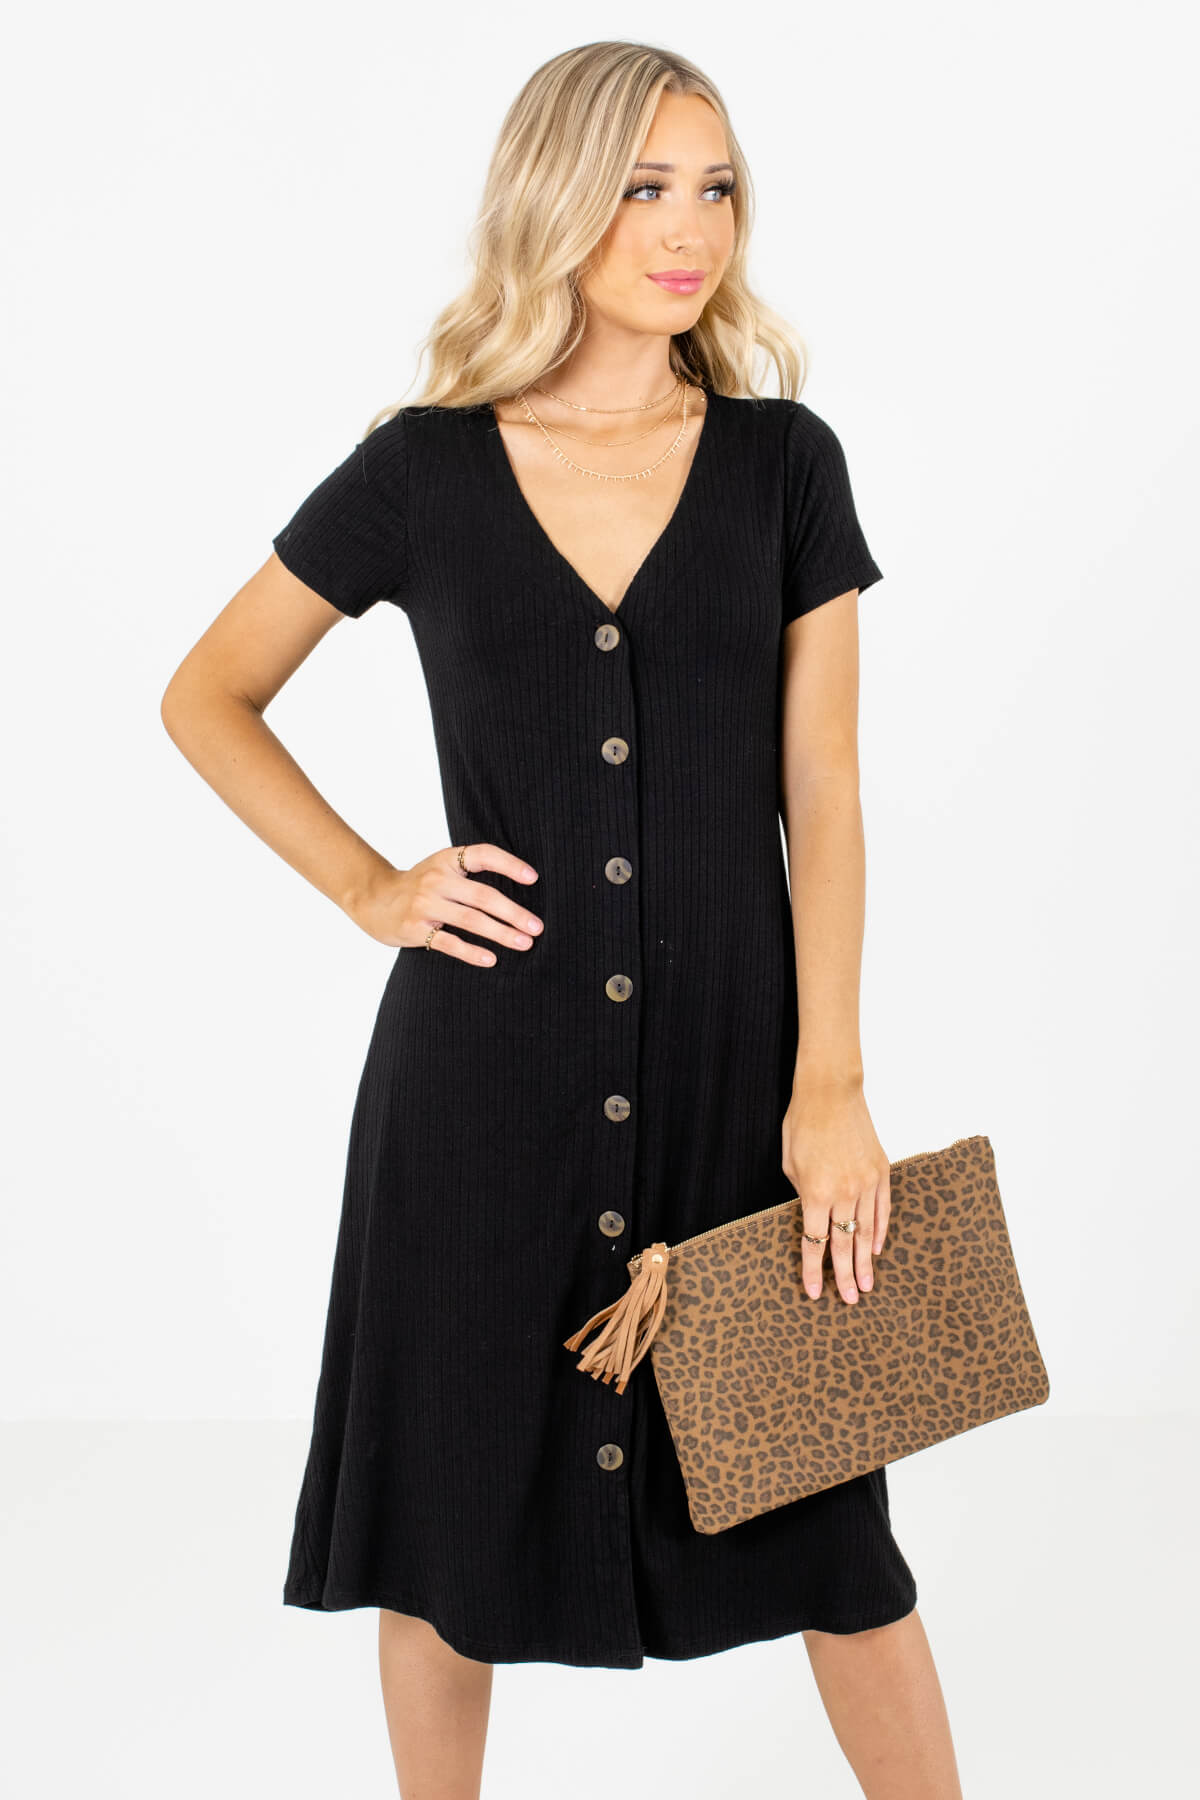 Black High-Quality Ribbed Material Boutique Midi Dresses for Women